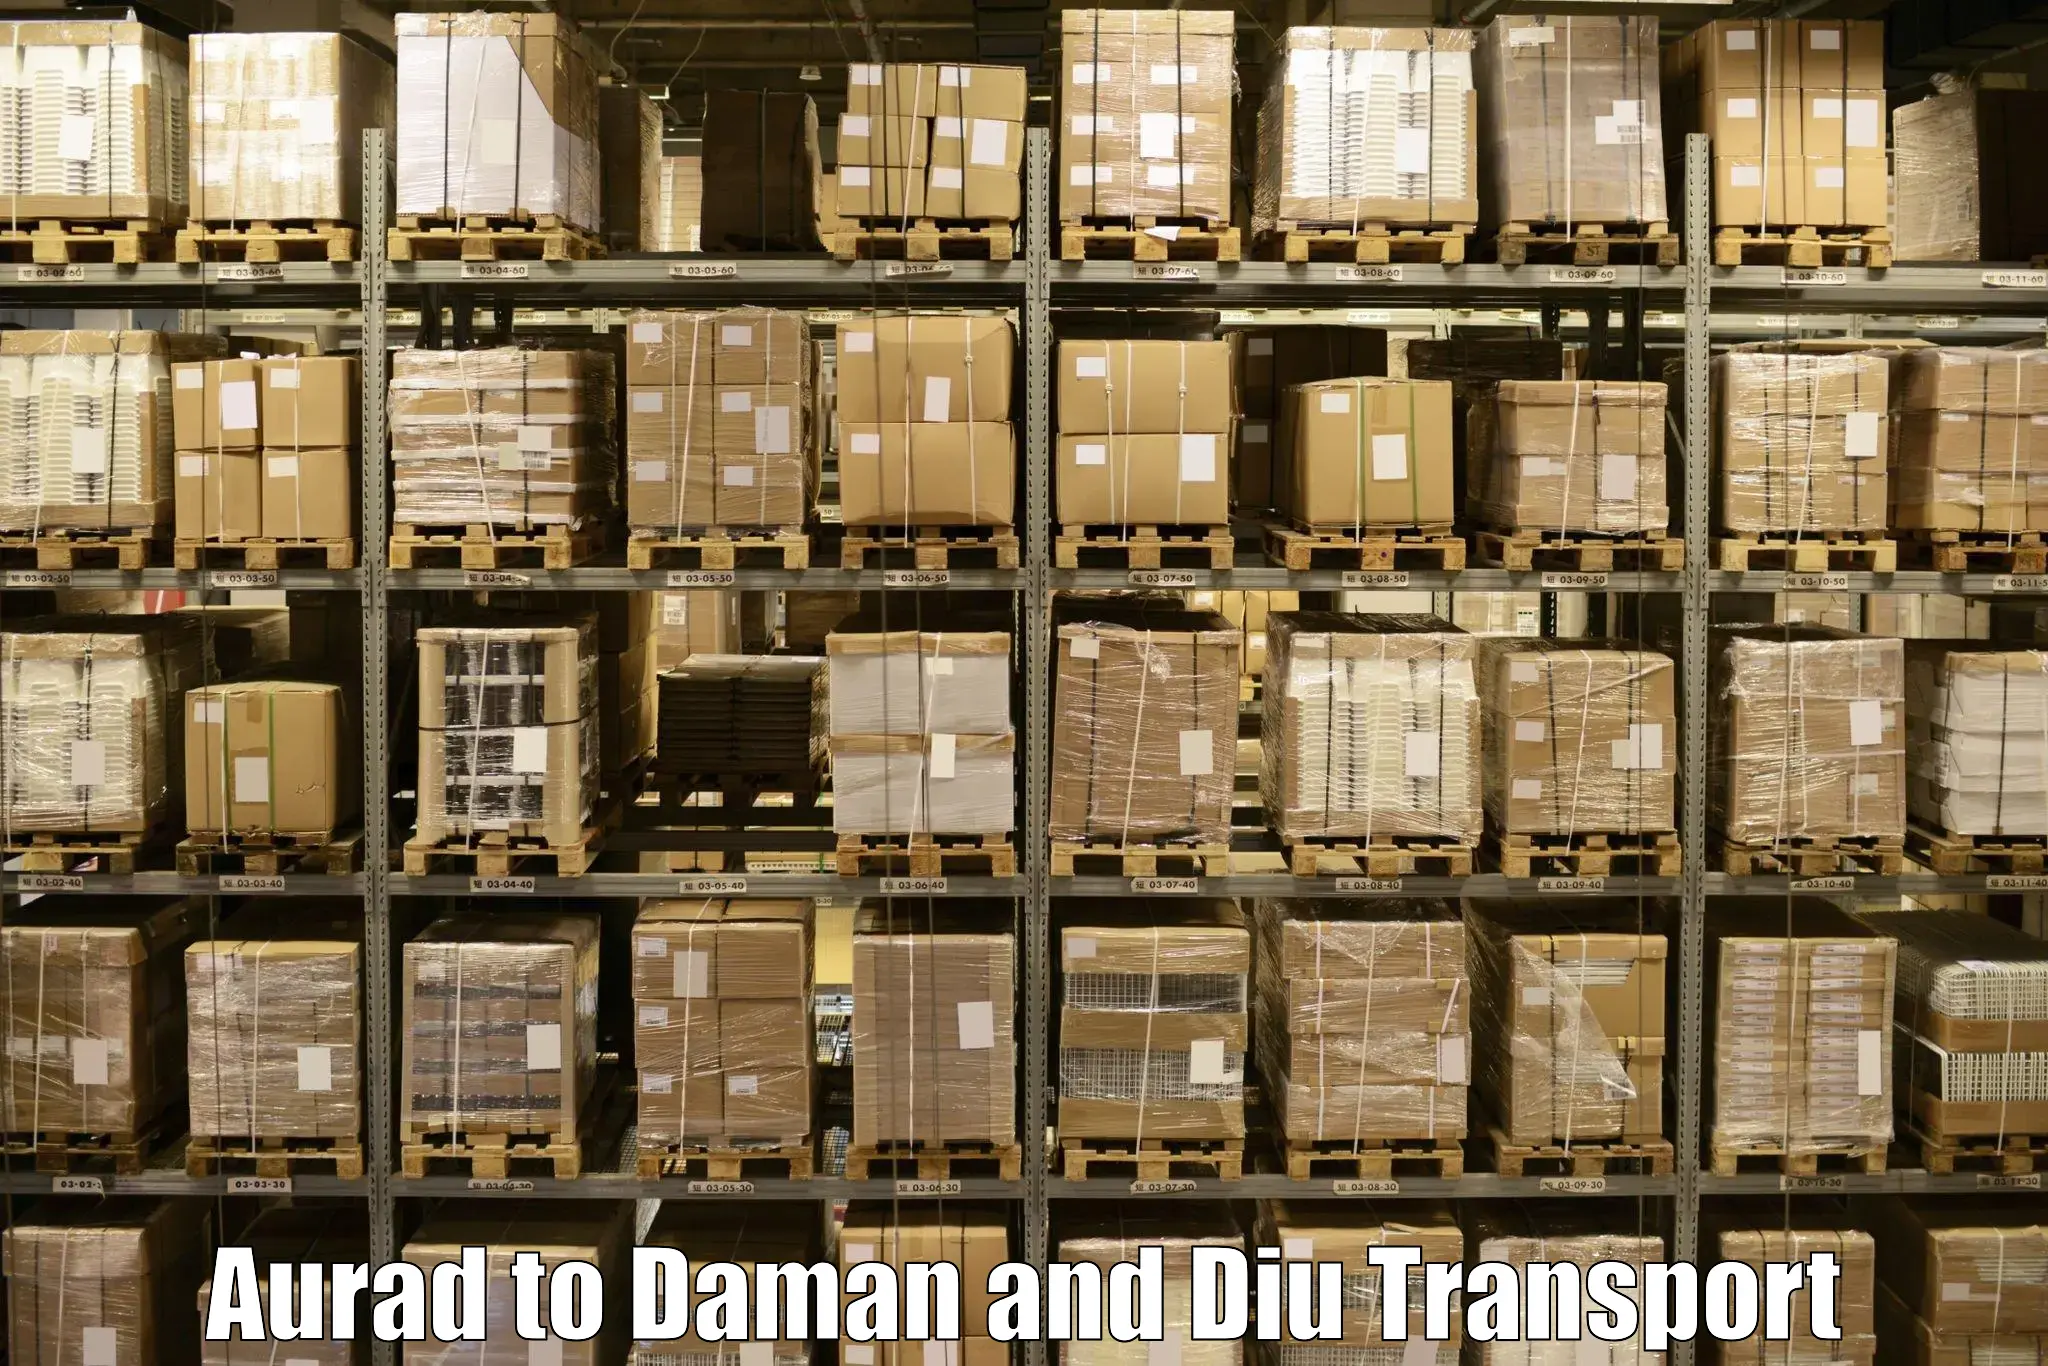 Commercial transport service in Aurad to Diu